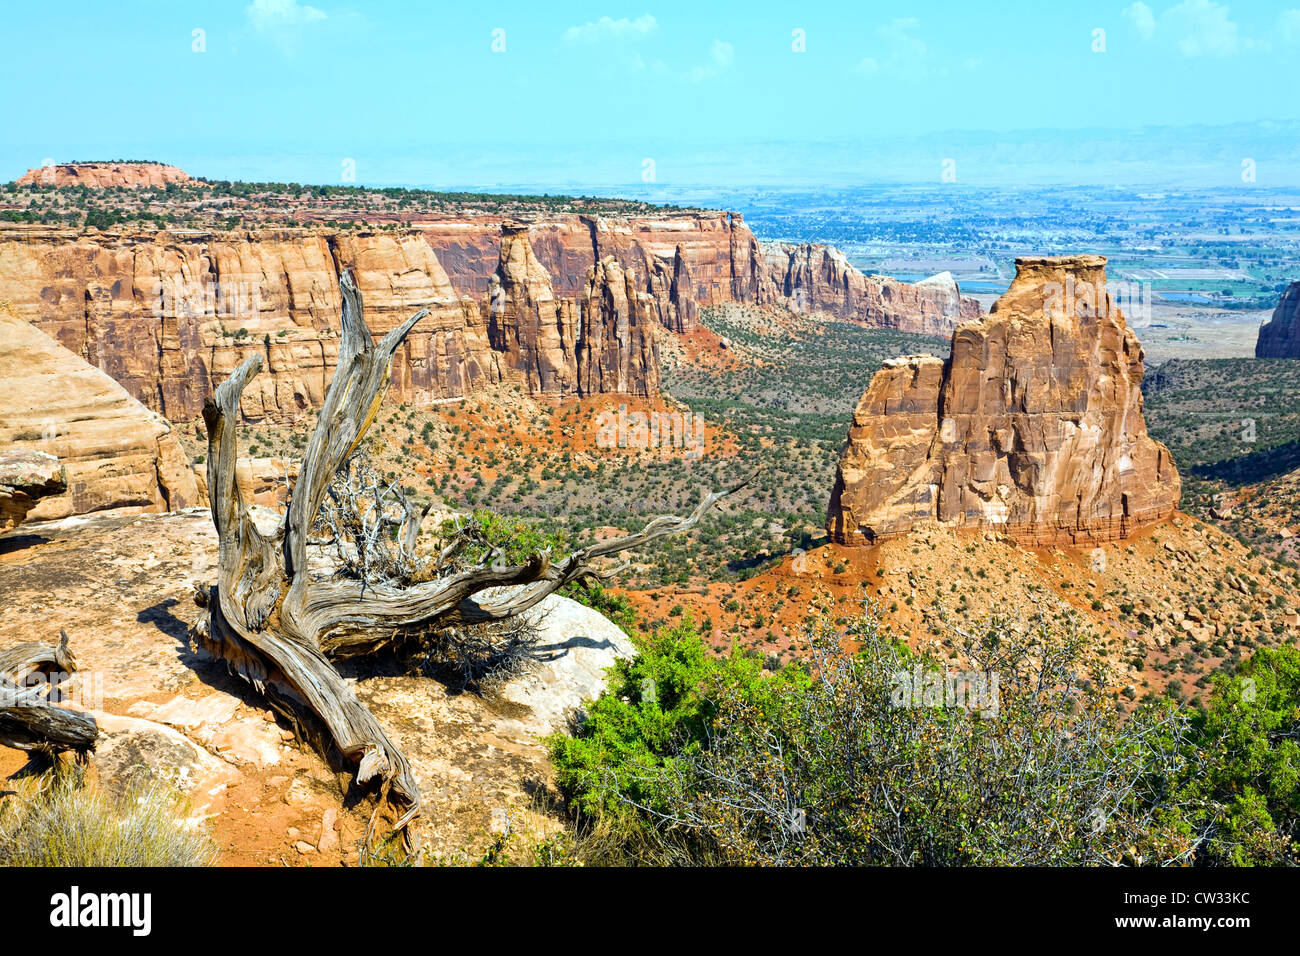 One of many spectacular views in the Colorado National Monument near Fruita, Colorado. Stock Photo